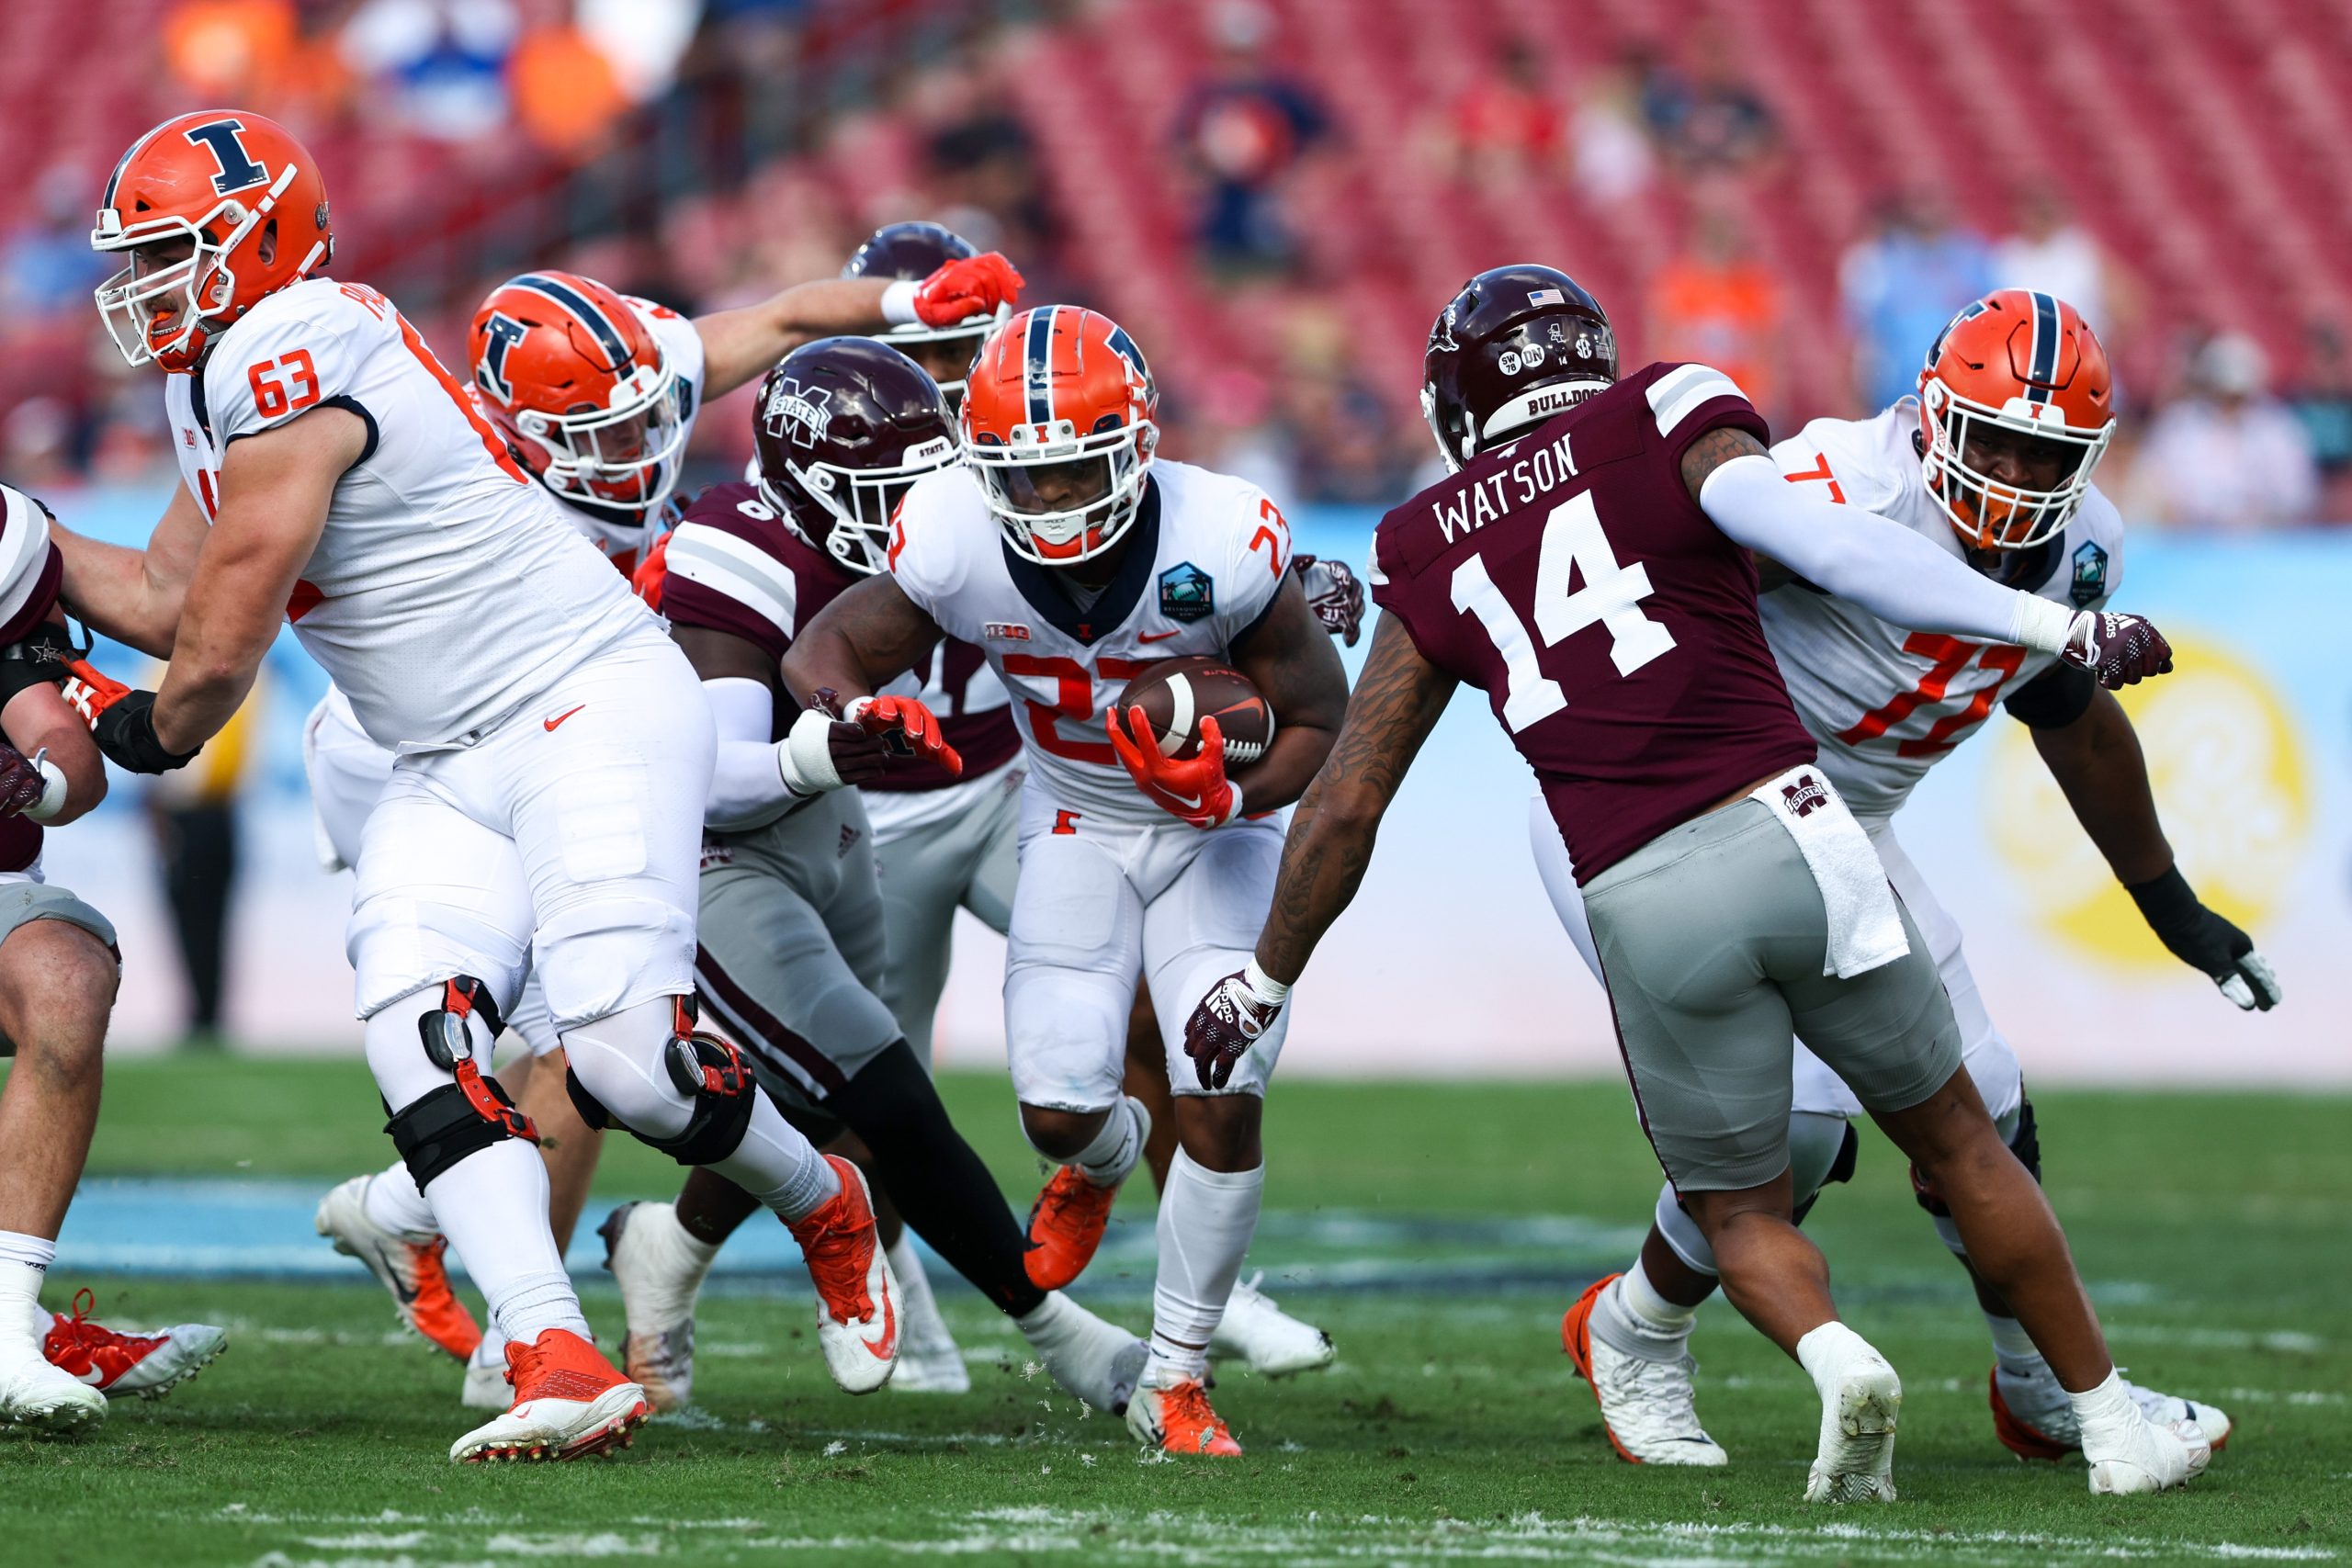 The Trench Report: Mississippi State